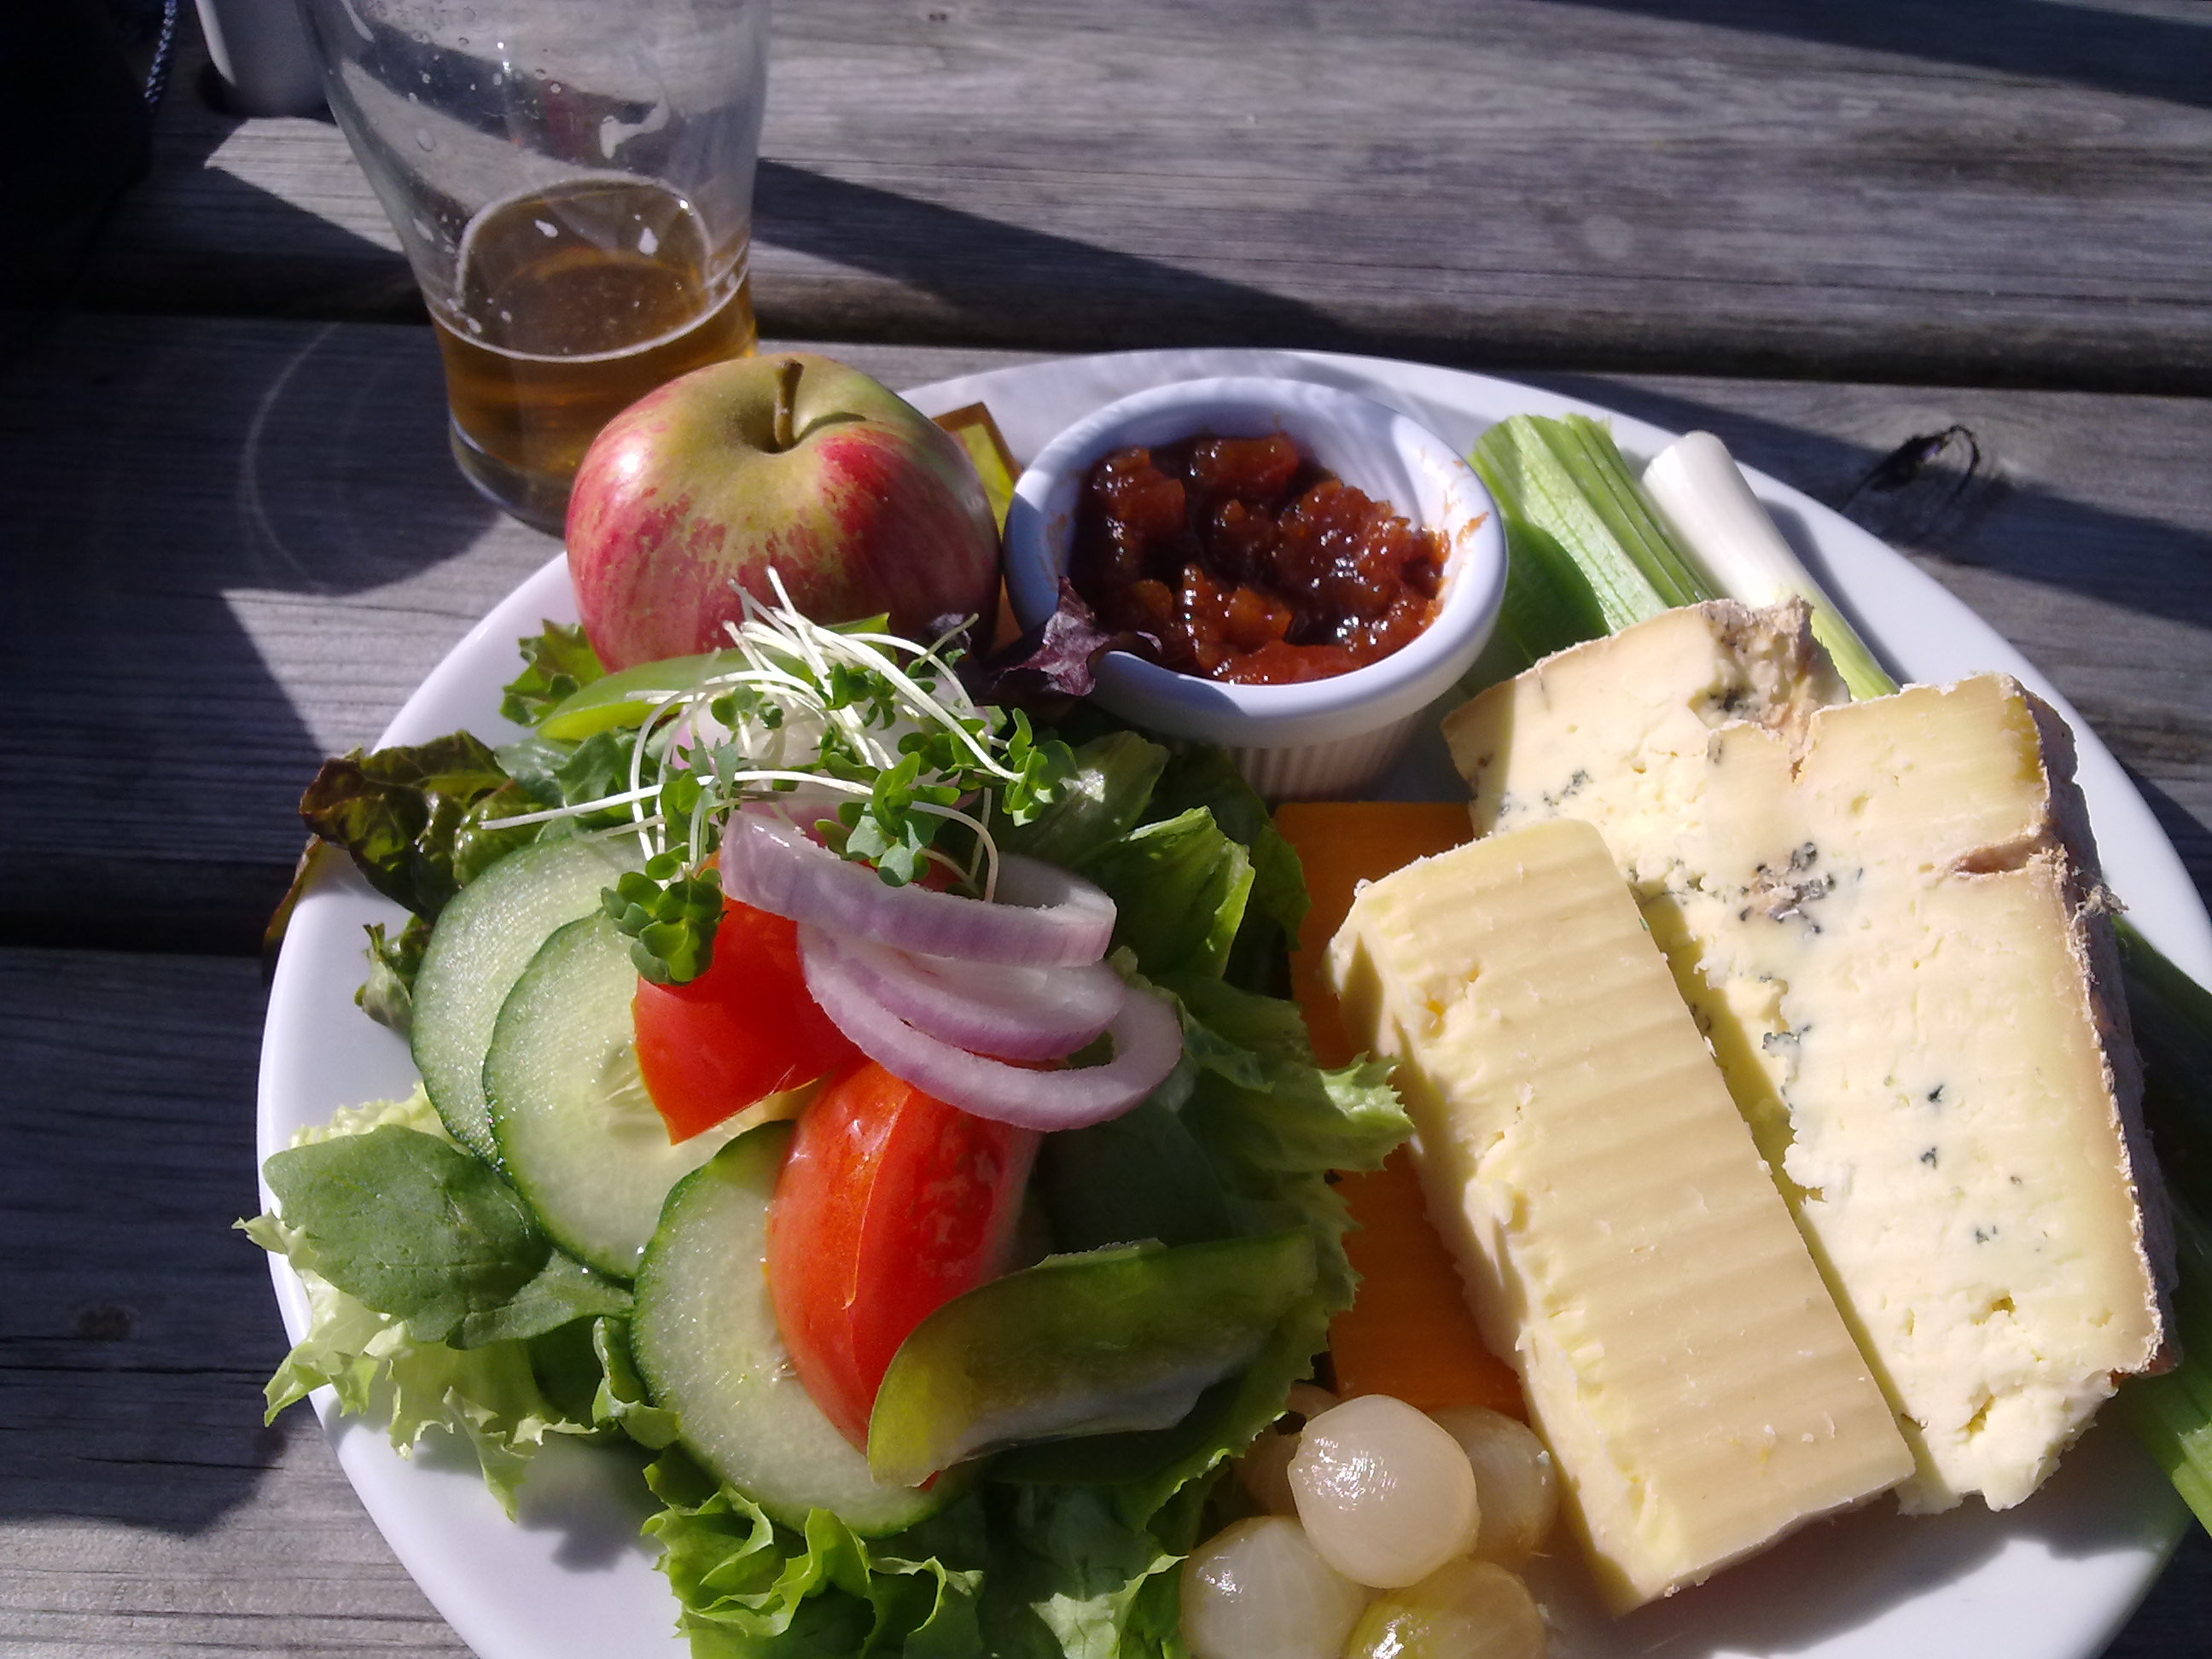 Cheese ploughmans and a half pint at the Rock of Gibraltar